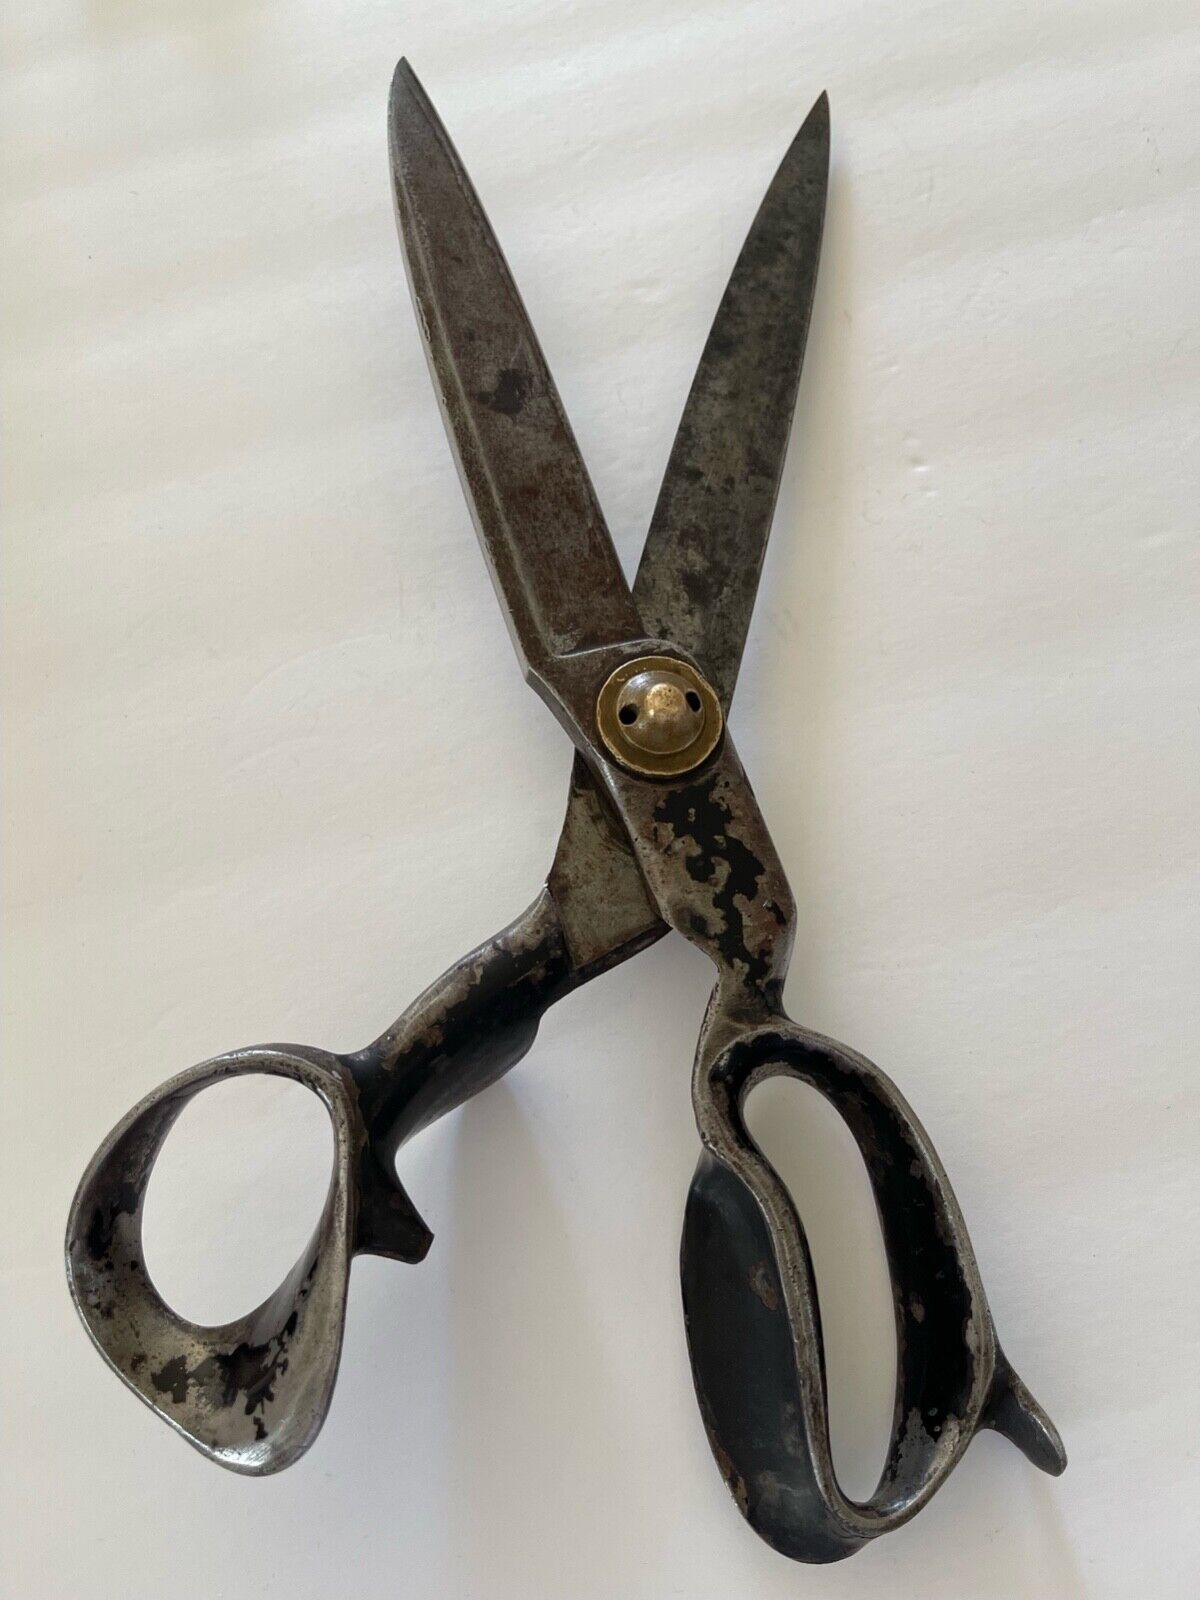 Tailors Shears J. Wiss and Sons, early 1900s